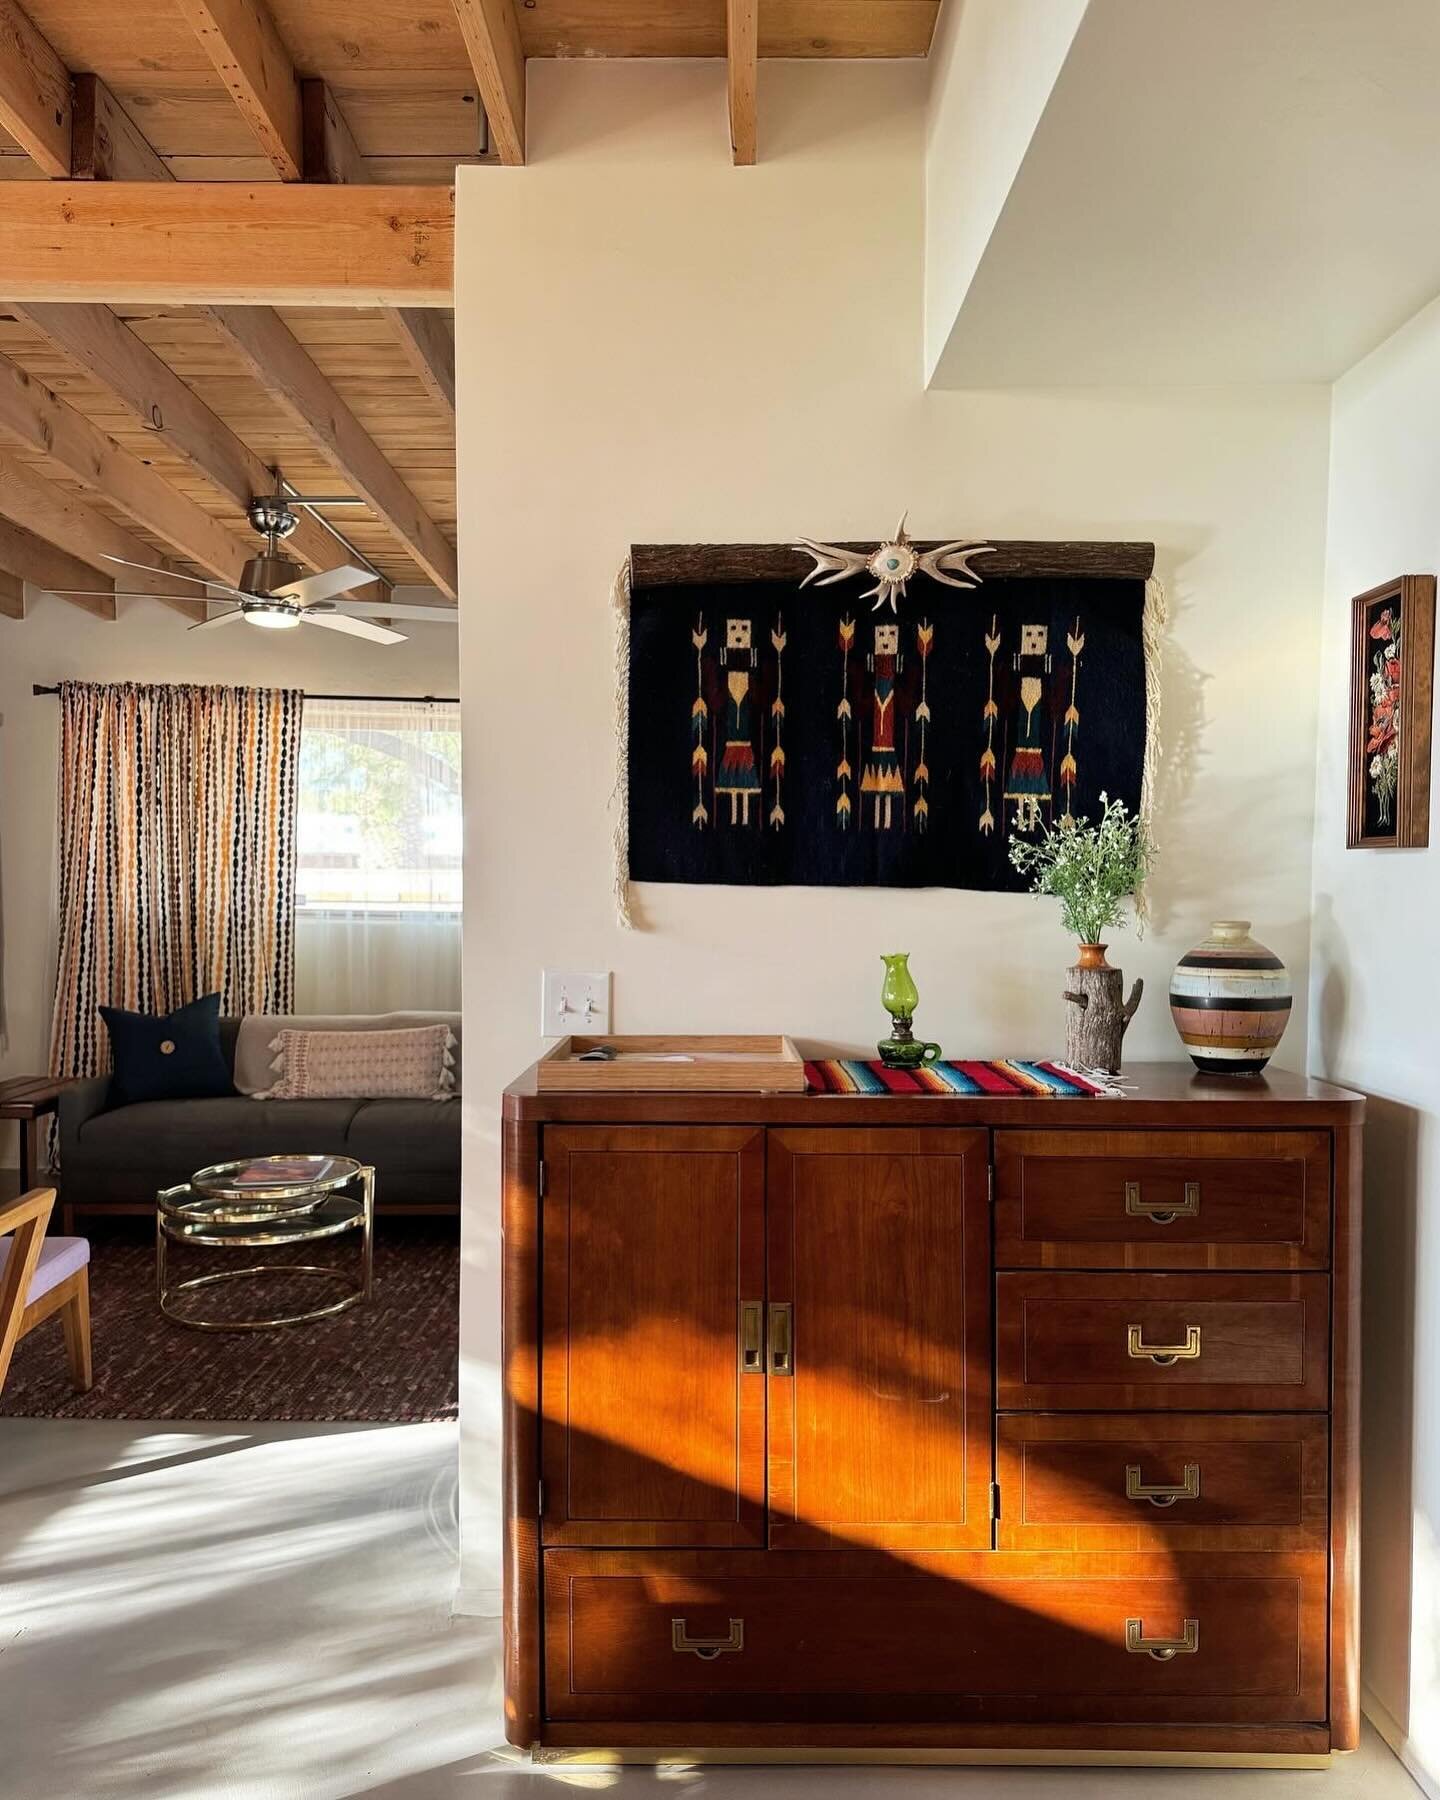 &ldquo;Mid-Century meets Southwest in this unique burnt adobe Tucson home. Cement overlay flooring, fresh paint, exposed wood beam ceilings, wood burning fireplace, fans throughout.&rdquo;

Excerpt from the listing by Found Realty

4 bed / 2 bath
221